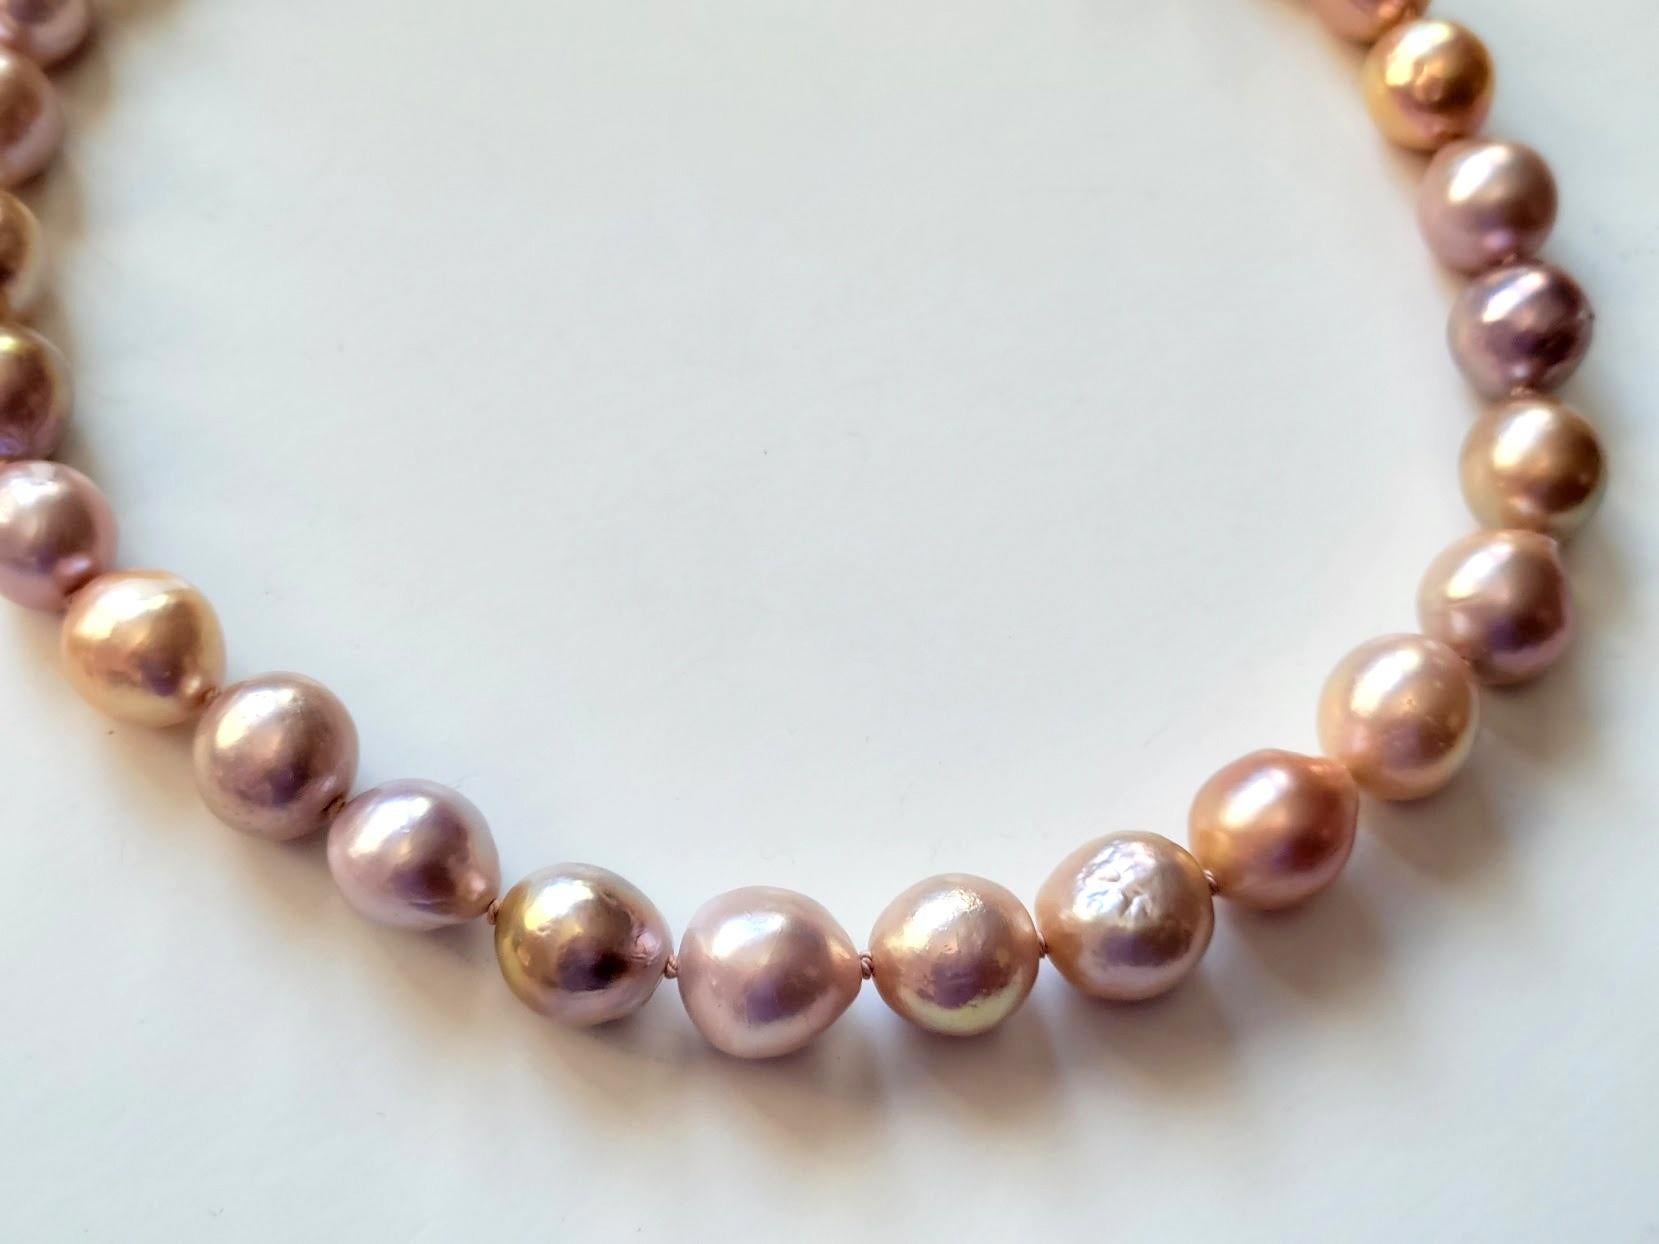 Introducing this unique and rare Chinese Kasumi-Like Metallic Freshwater Baroque pearl necklace! Lovely necklace, dusted with metallic golden overtones over shades of dusky rose, vivid peach, and shades of pink tinged with delightful champagne. 
The